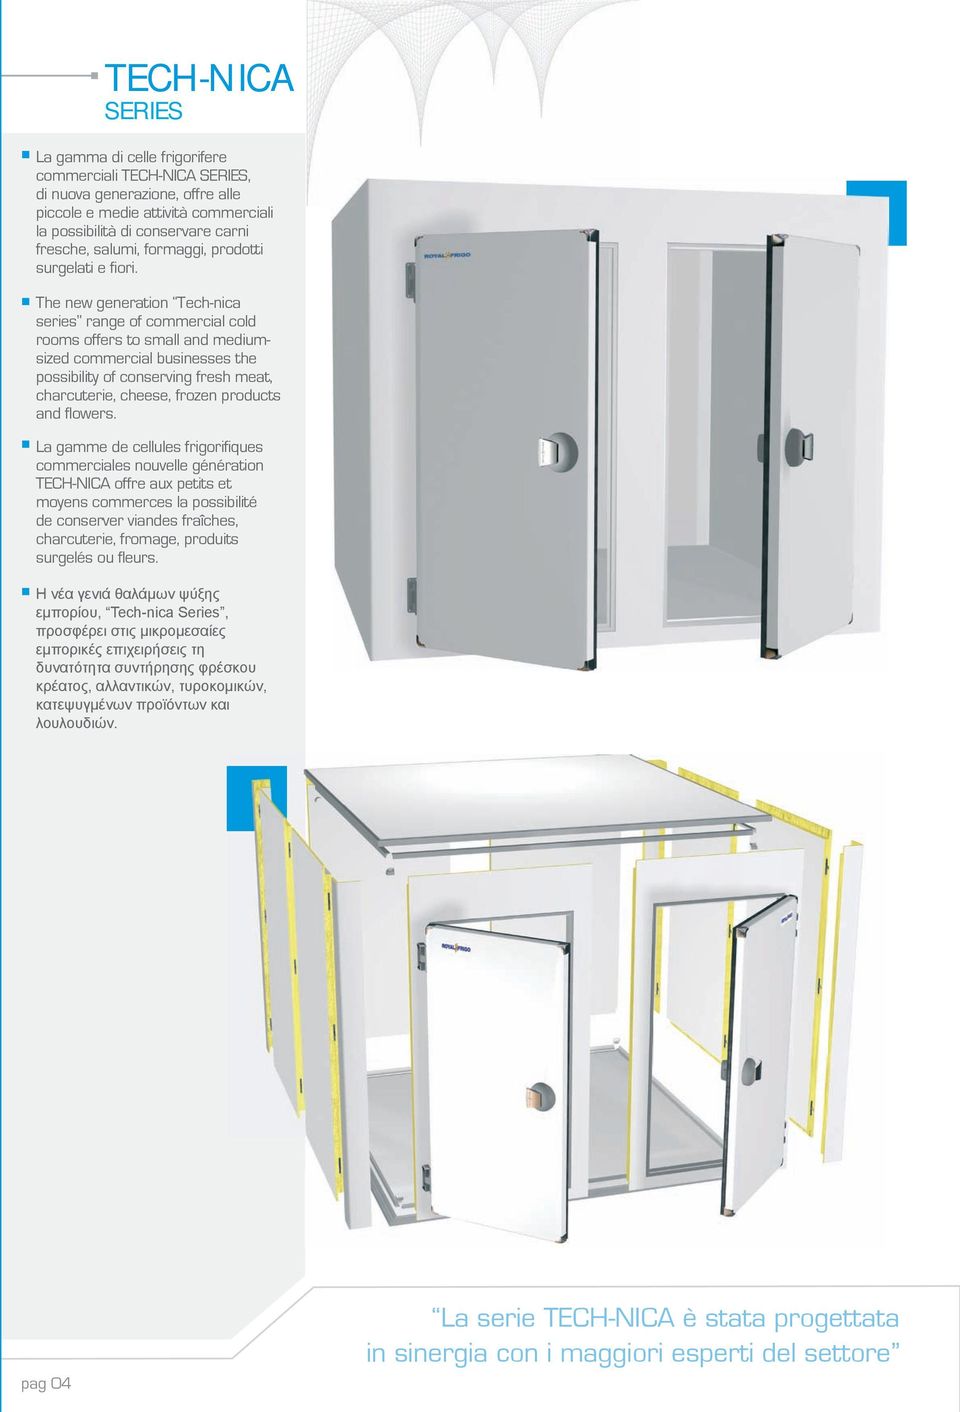 The new generation Tech-nica series range of commercial cold rooms offers to small and mediumsized commercial businesses the possibility of conserving fresh meat, charcuterie, cheese, frozen products